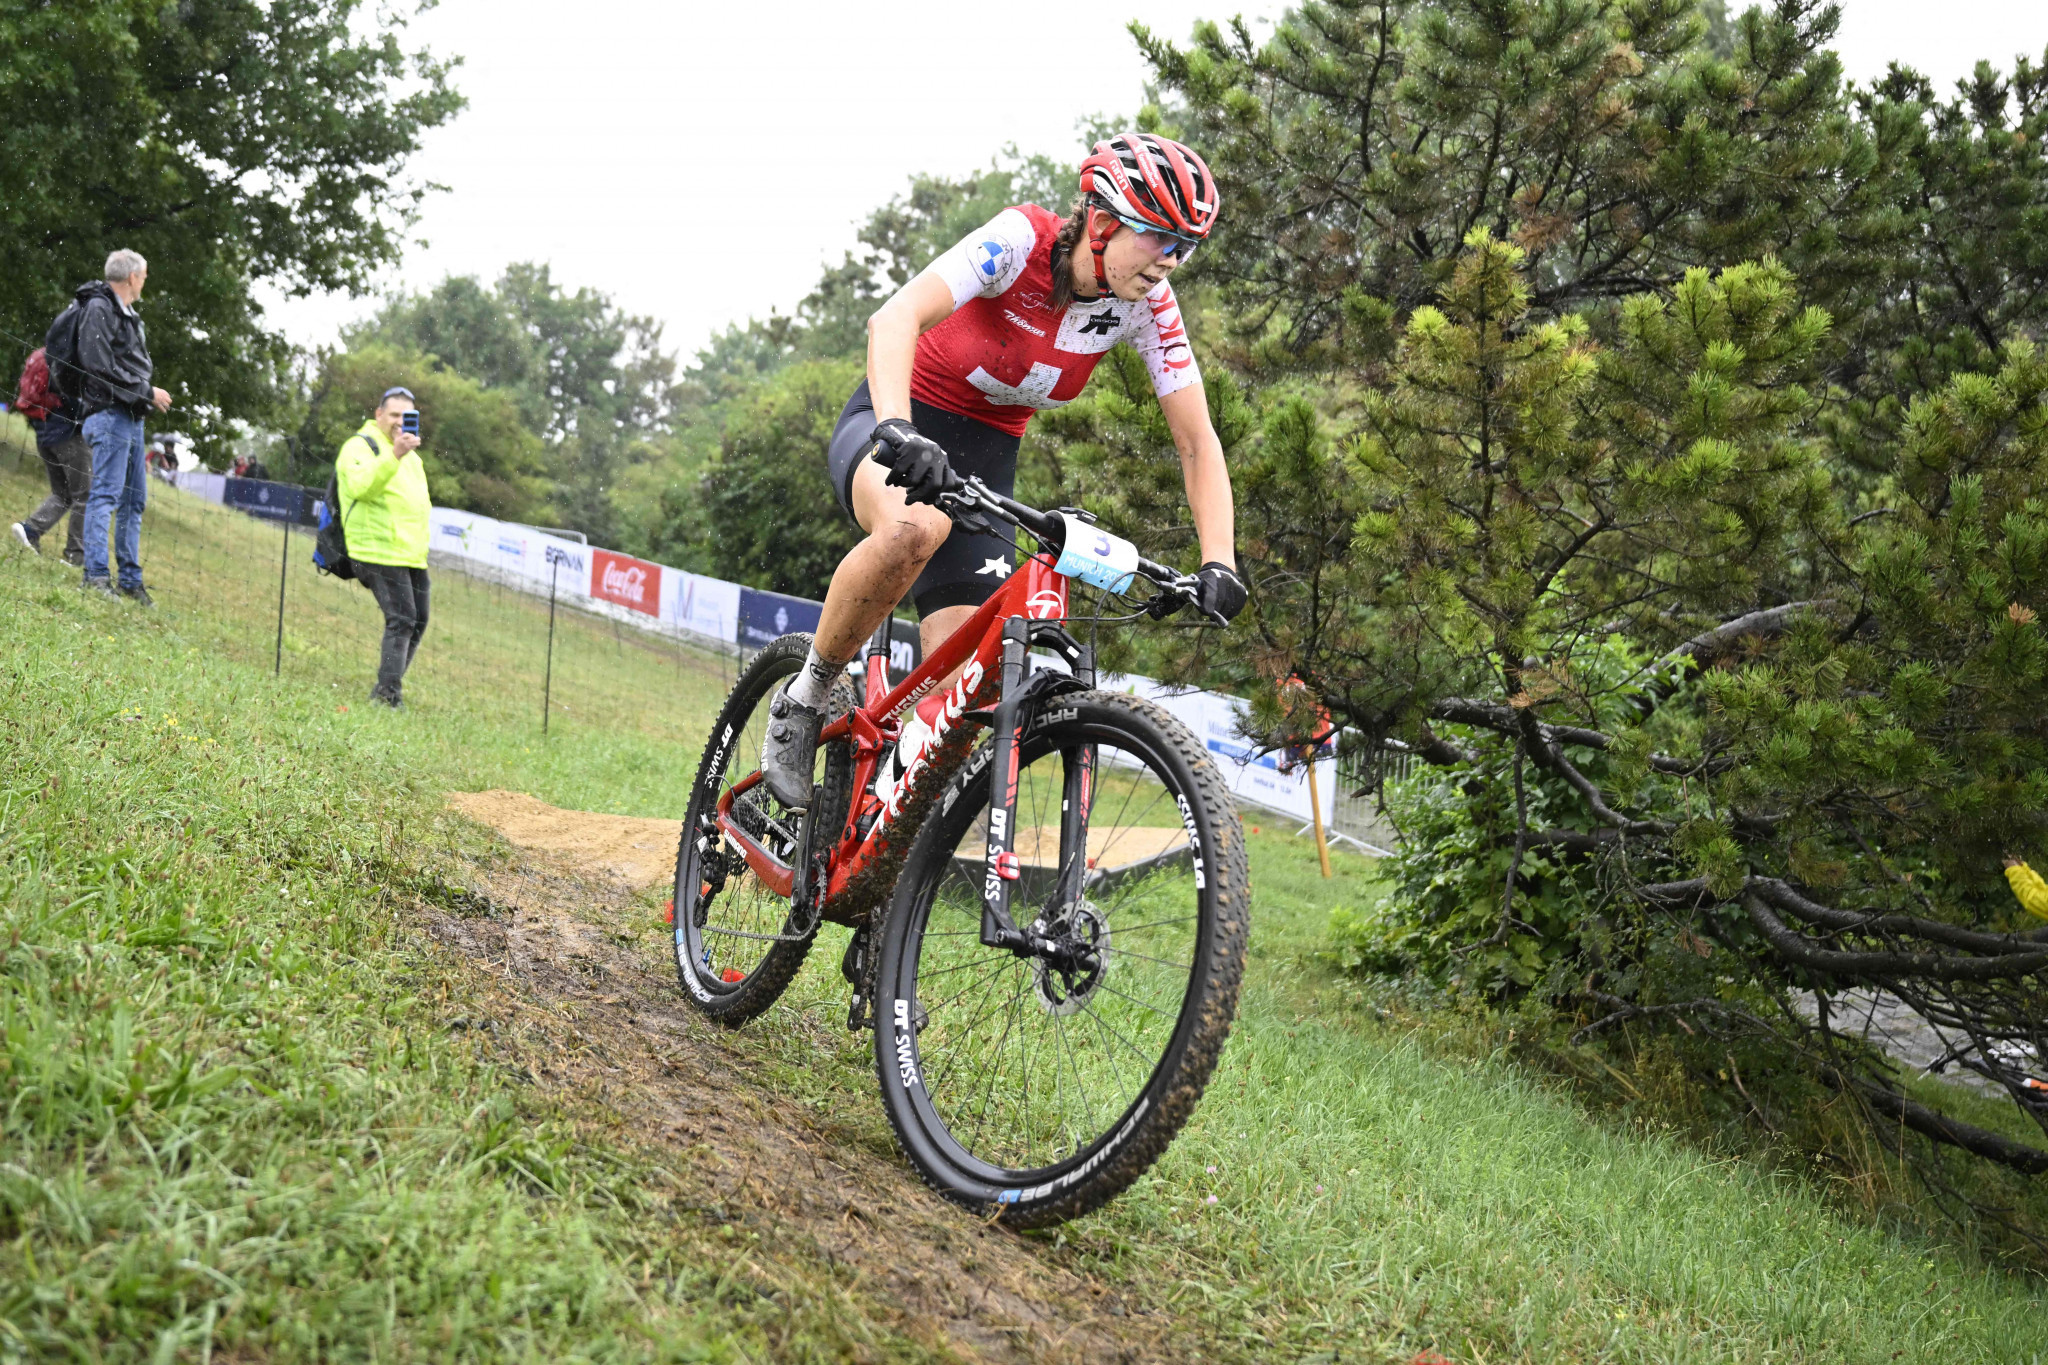 Hatherly and Keller secure short track titles at UCI Mountain Bike World Cup